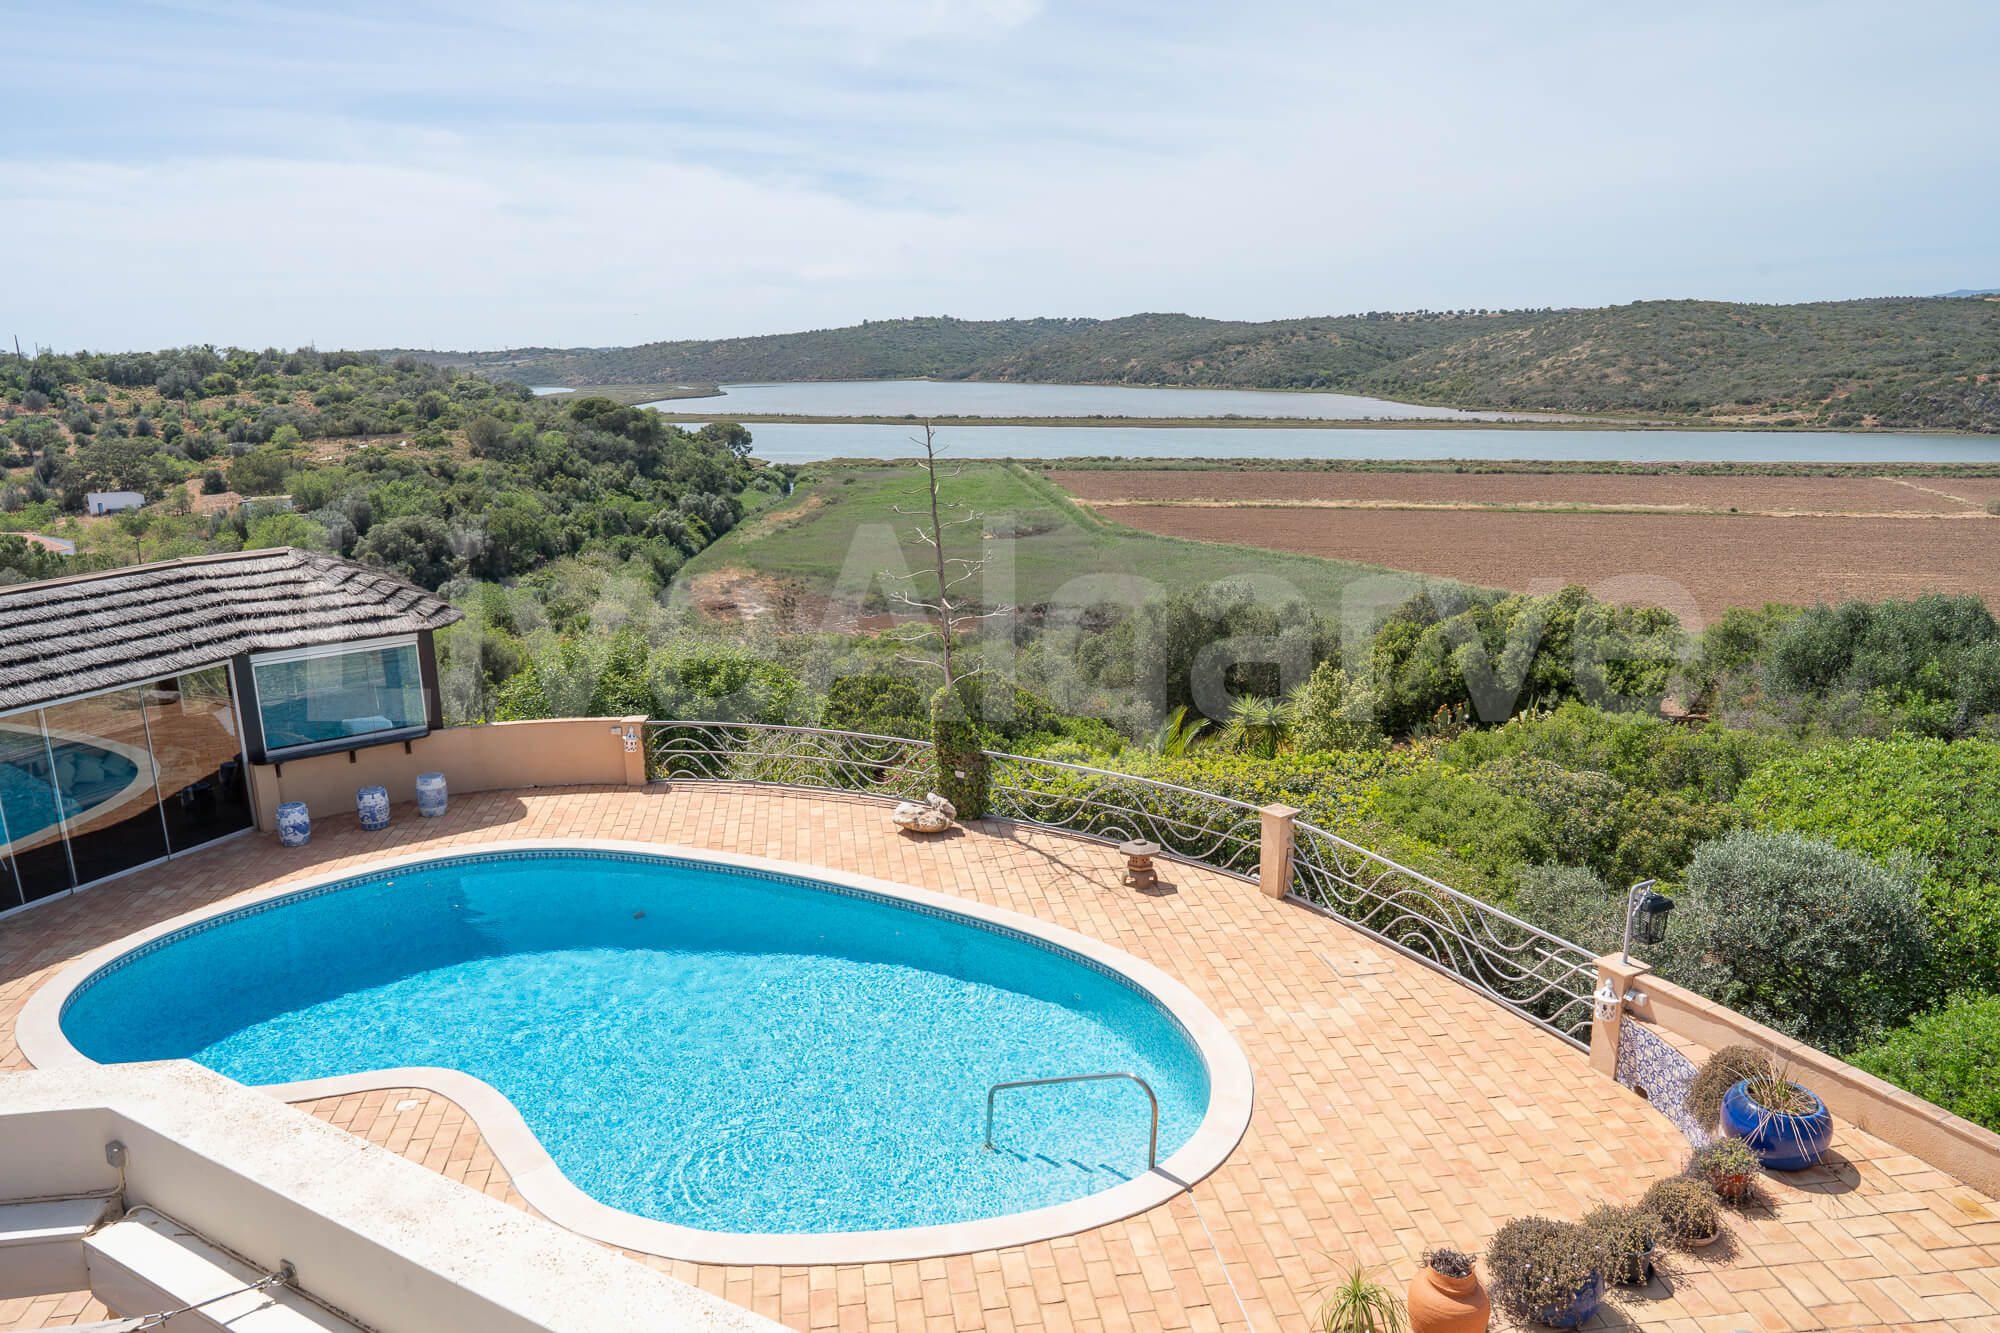 RIVER VIEW | A Dream T3 Villa Awaits! Experience Luxury Living by the River Arade at Estômbar  - Lagoa